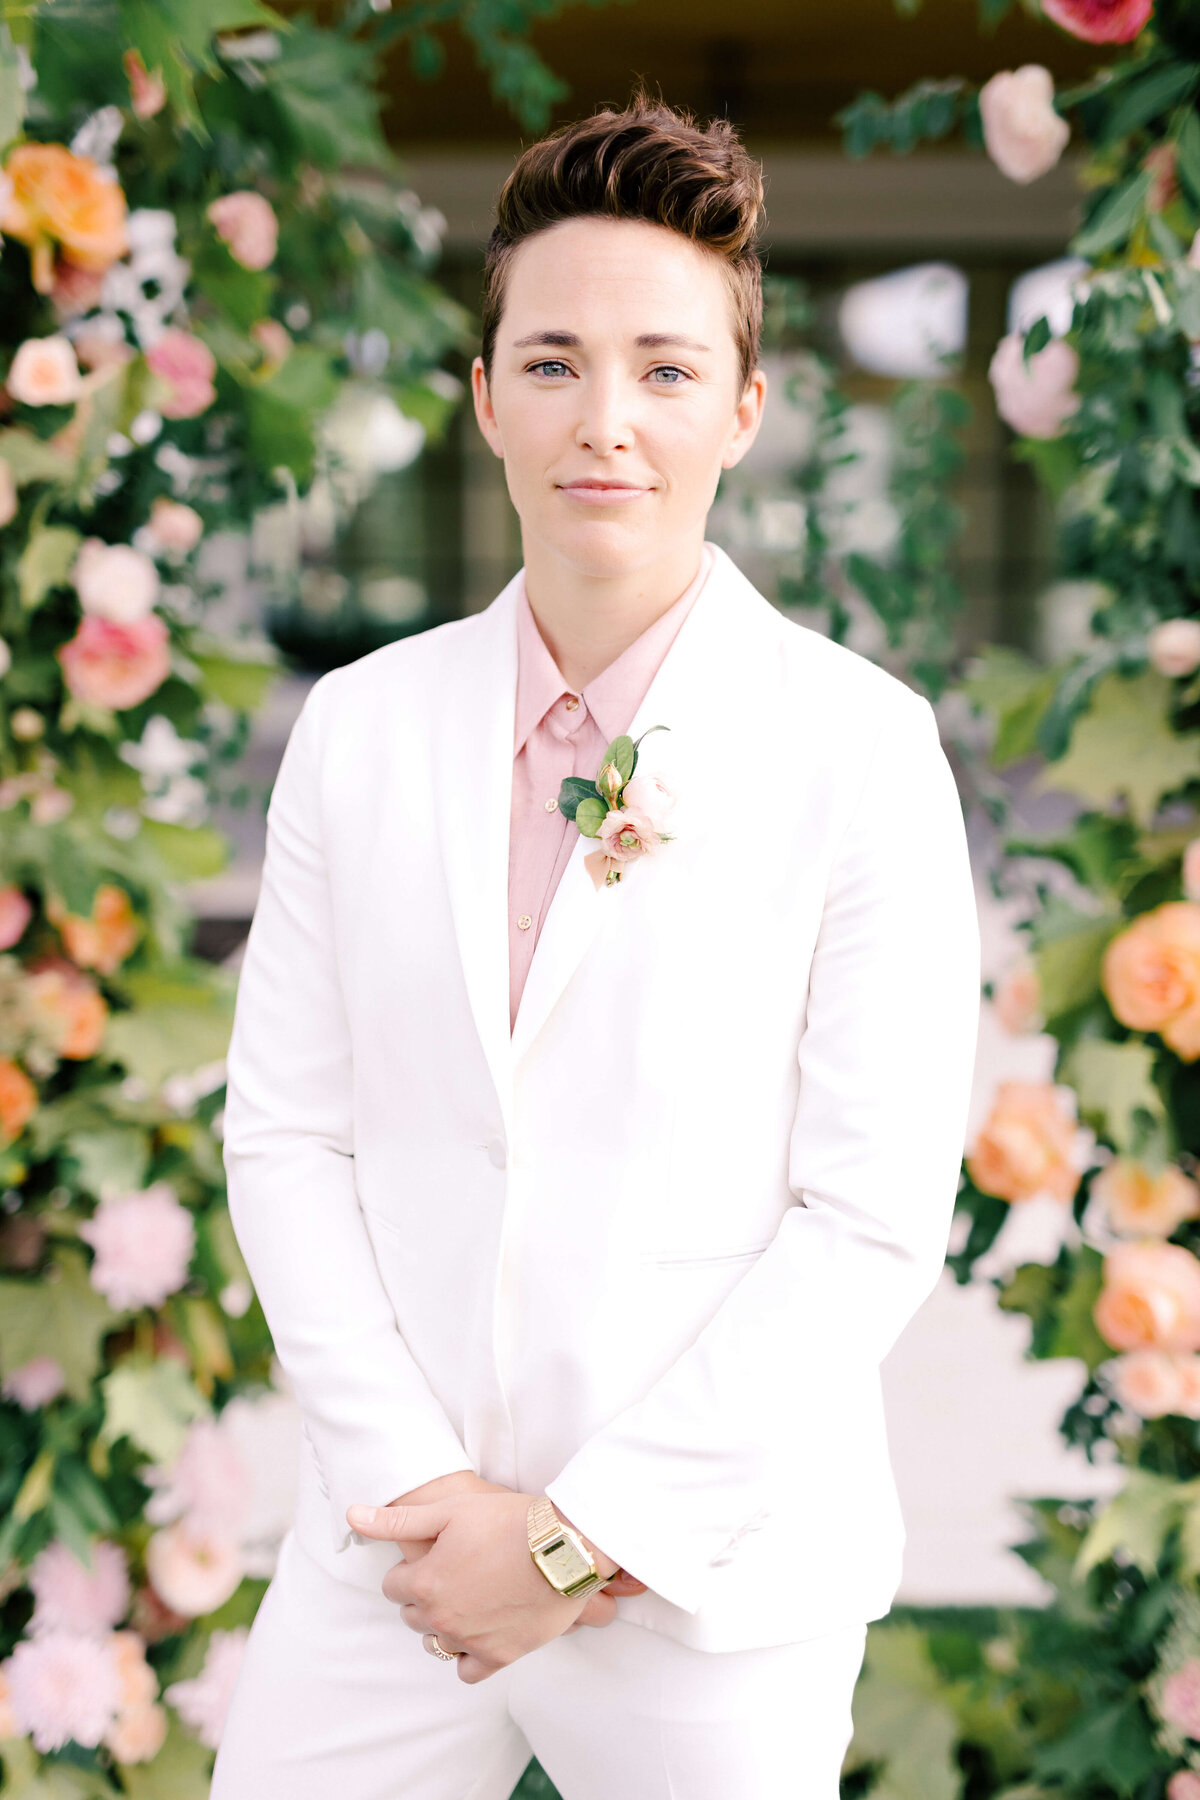 Wedding day attire with a beautifully tailored white tuxedo by The Suit Shop with a blush button-down